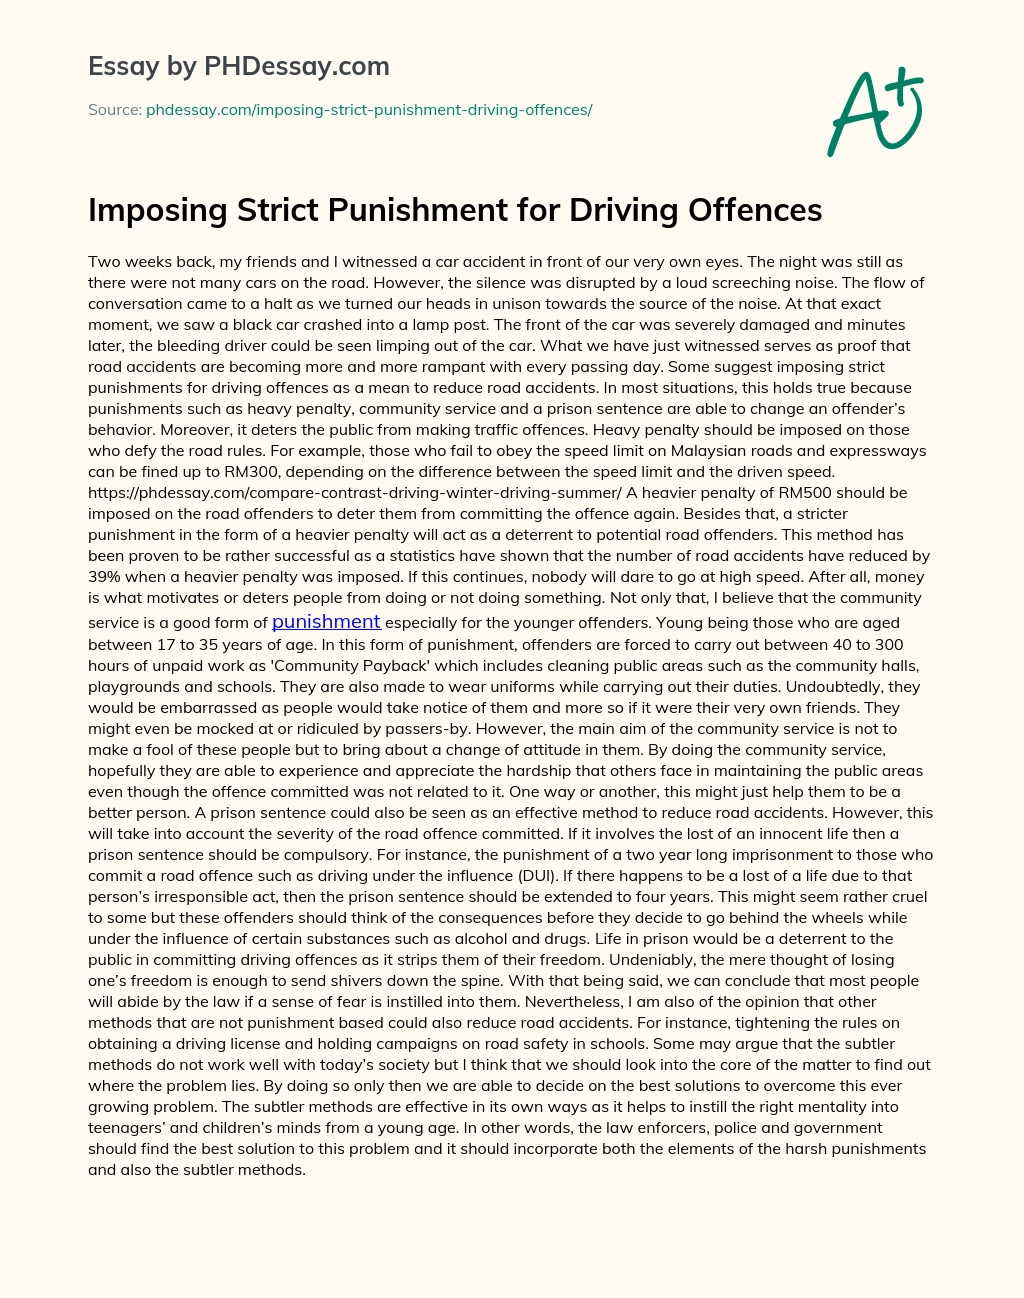 Imposing Strict Punishment for Driving Offences essay